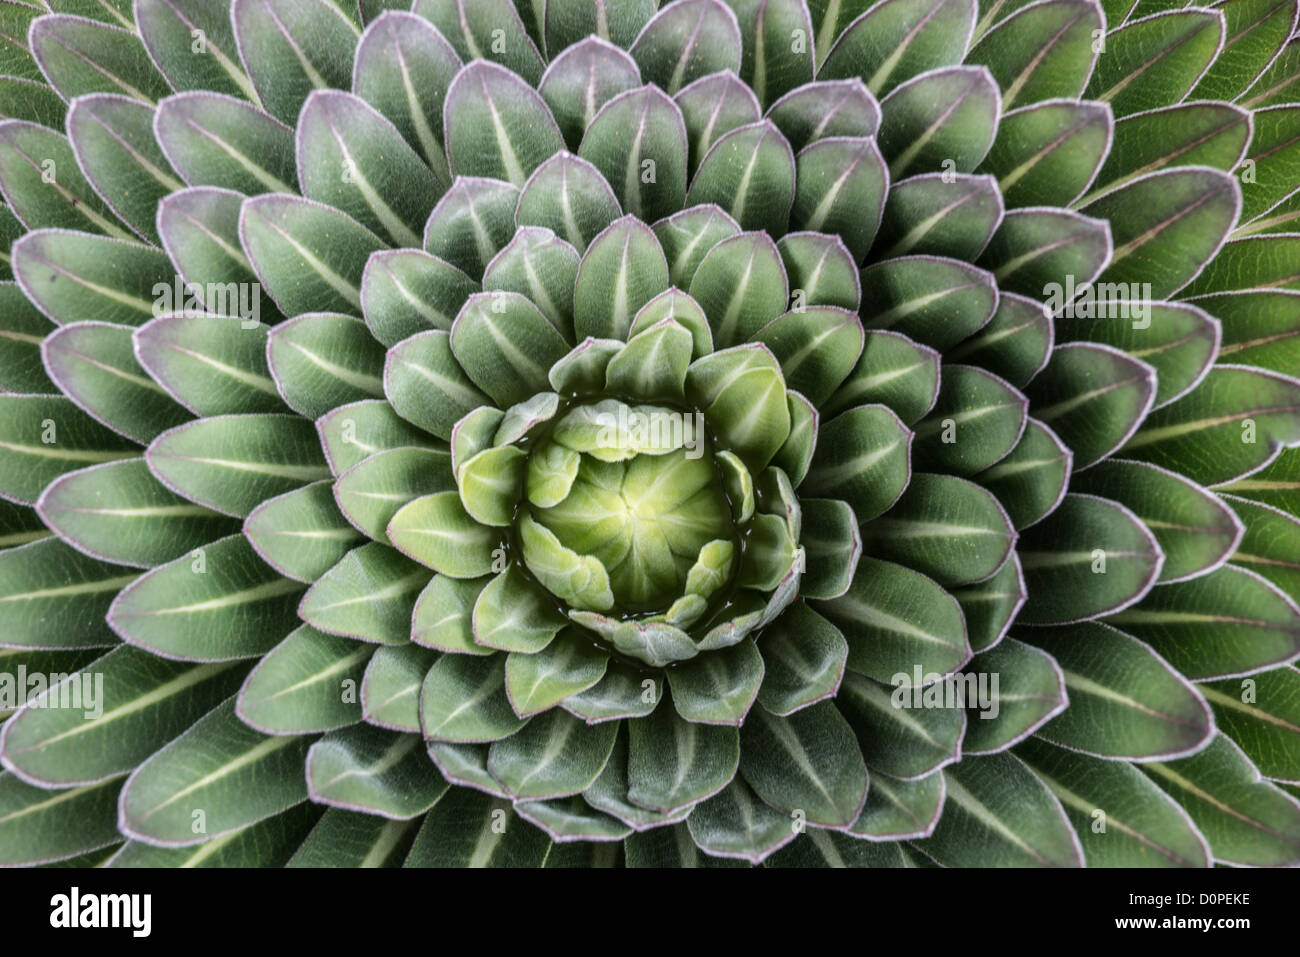 MT KILIMANJARO, Tanzania - The head of a Giant Lobelia, a common east African mountain plant, seen from directly above. Stock Photo